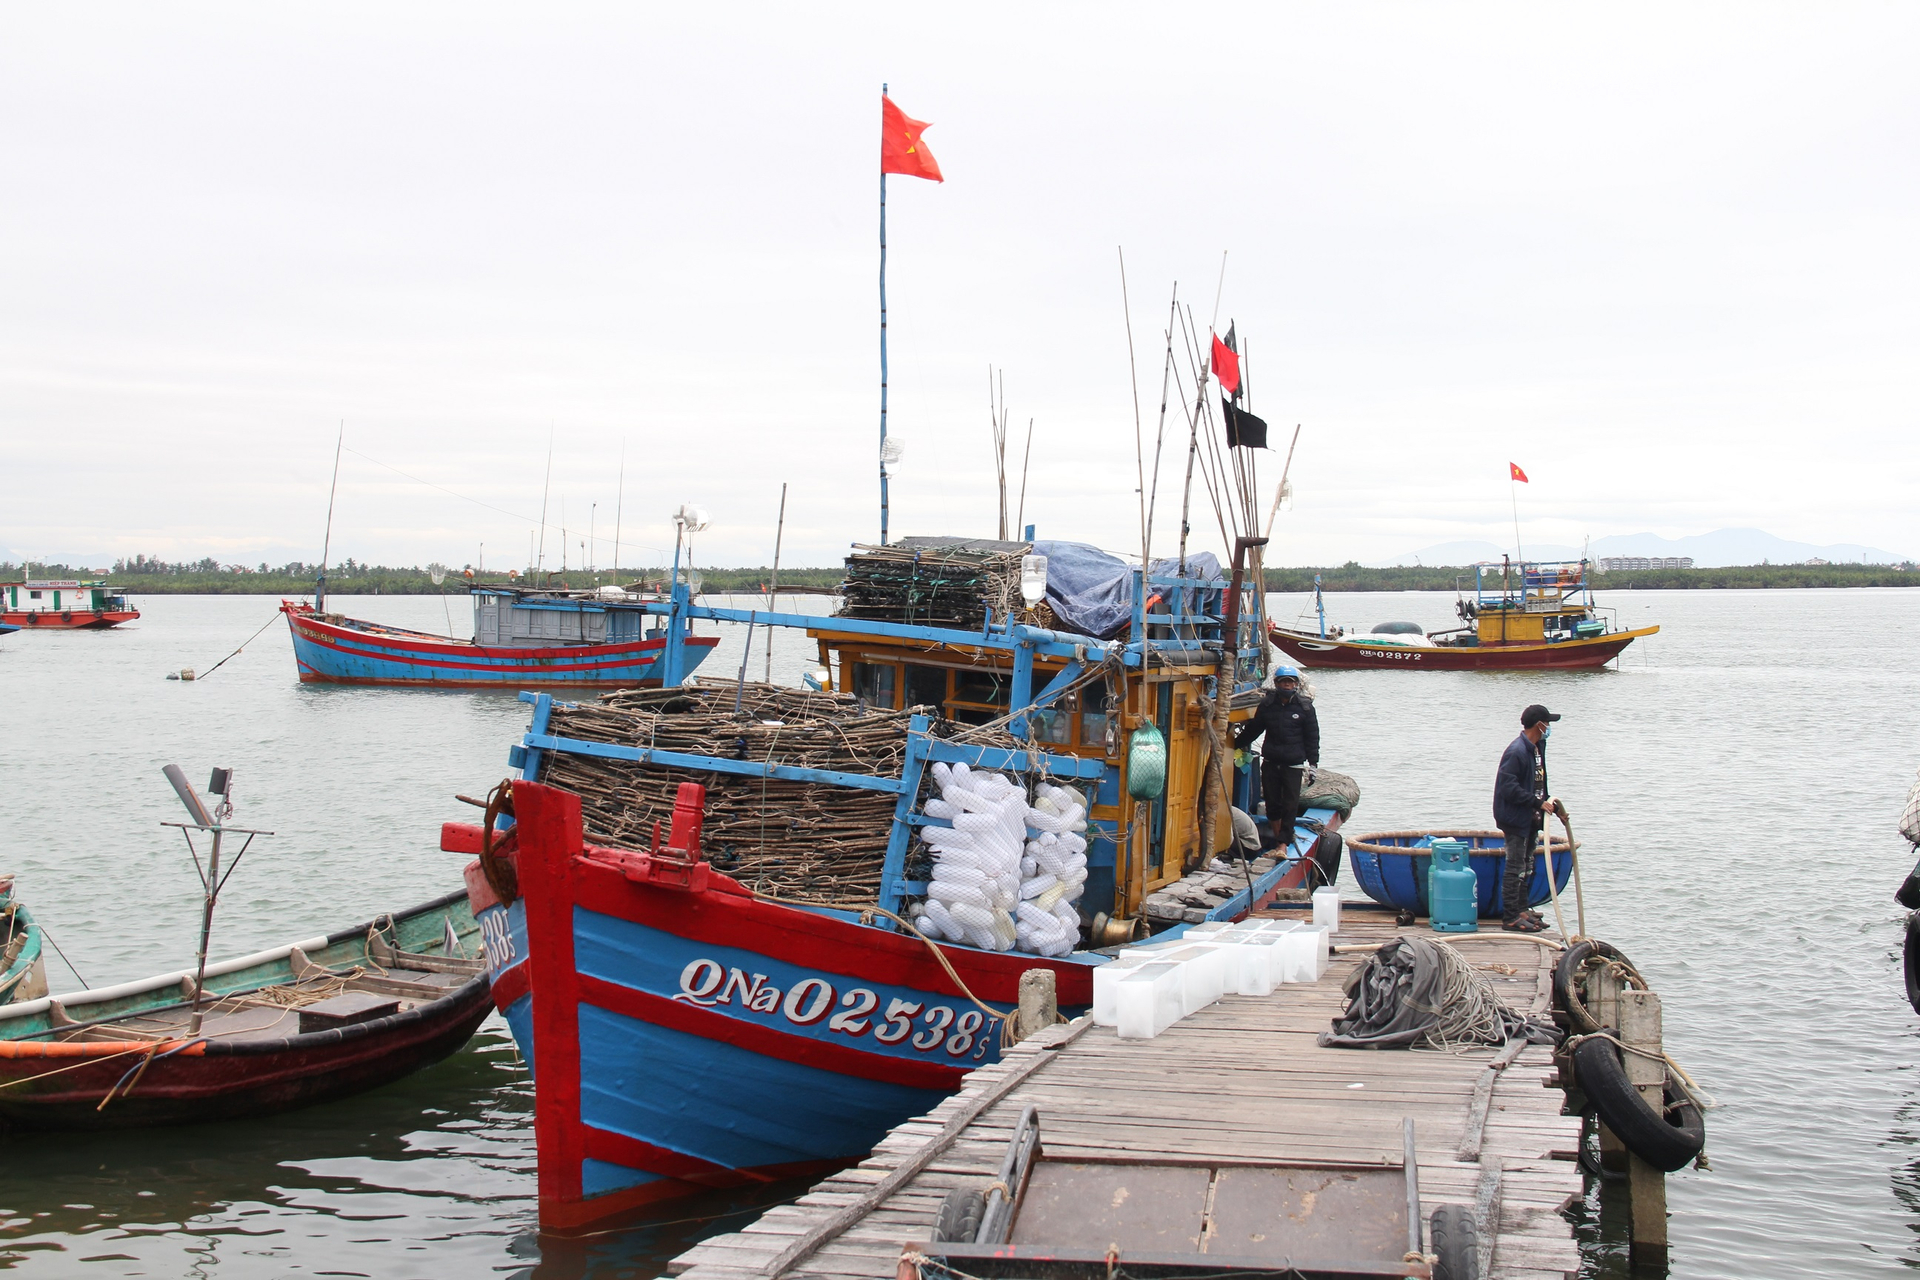 Quang Nam province has a fishing fleet of more than 2,700 vessels. Photo: L.K.